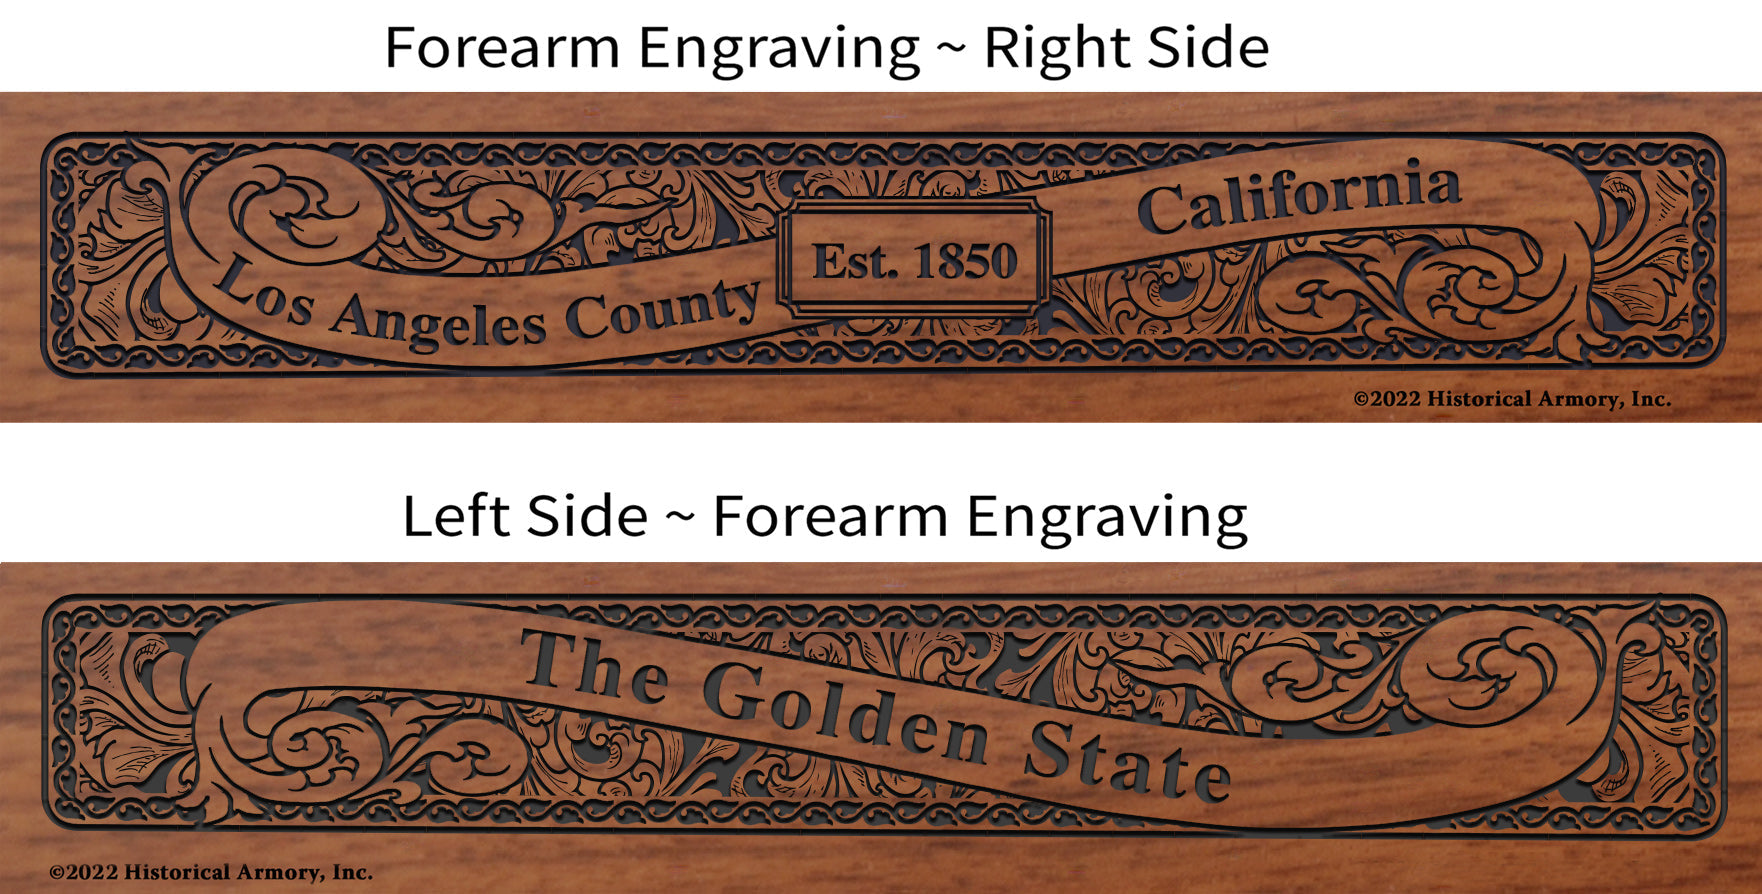 Los Angeles County California Engraved Rifle Forearm